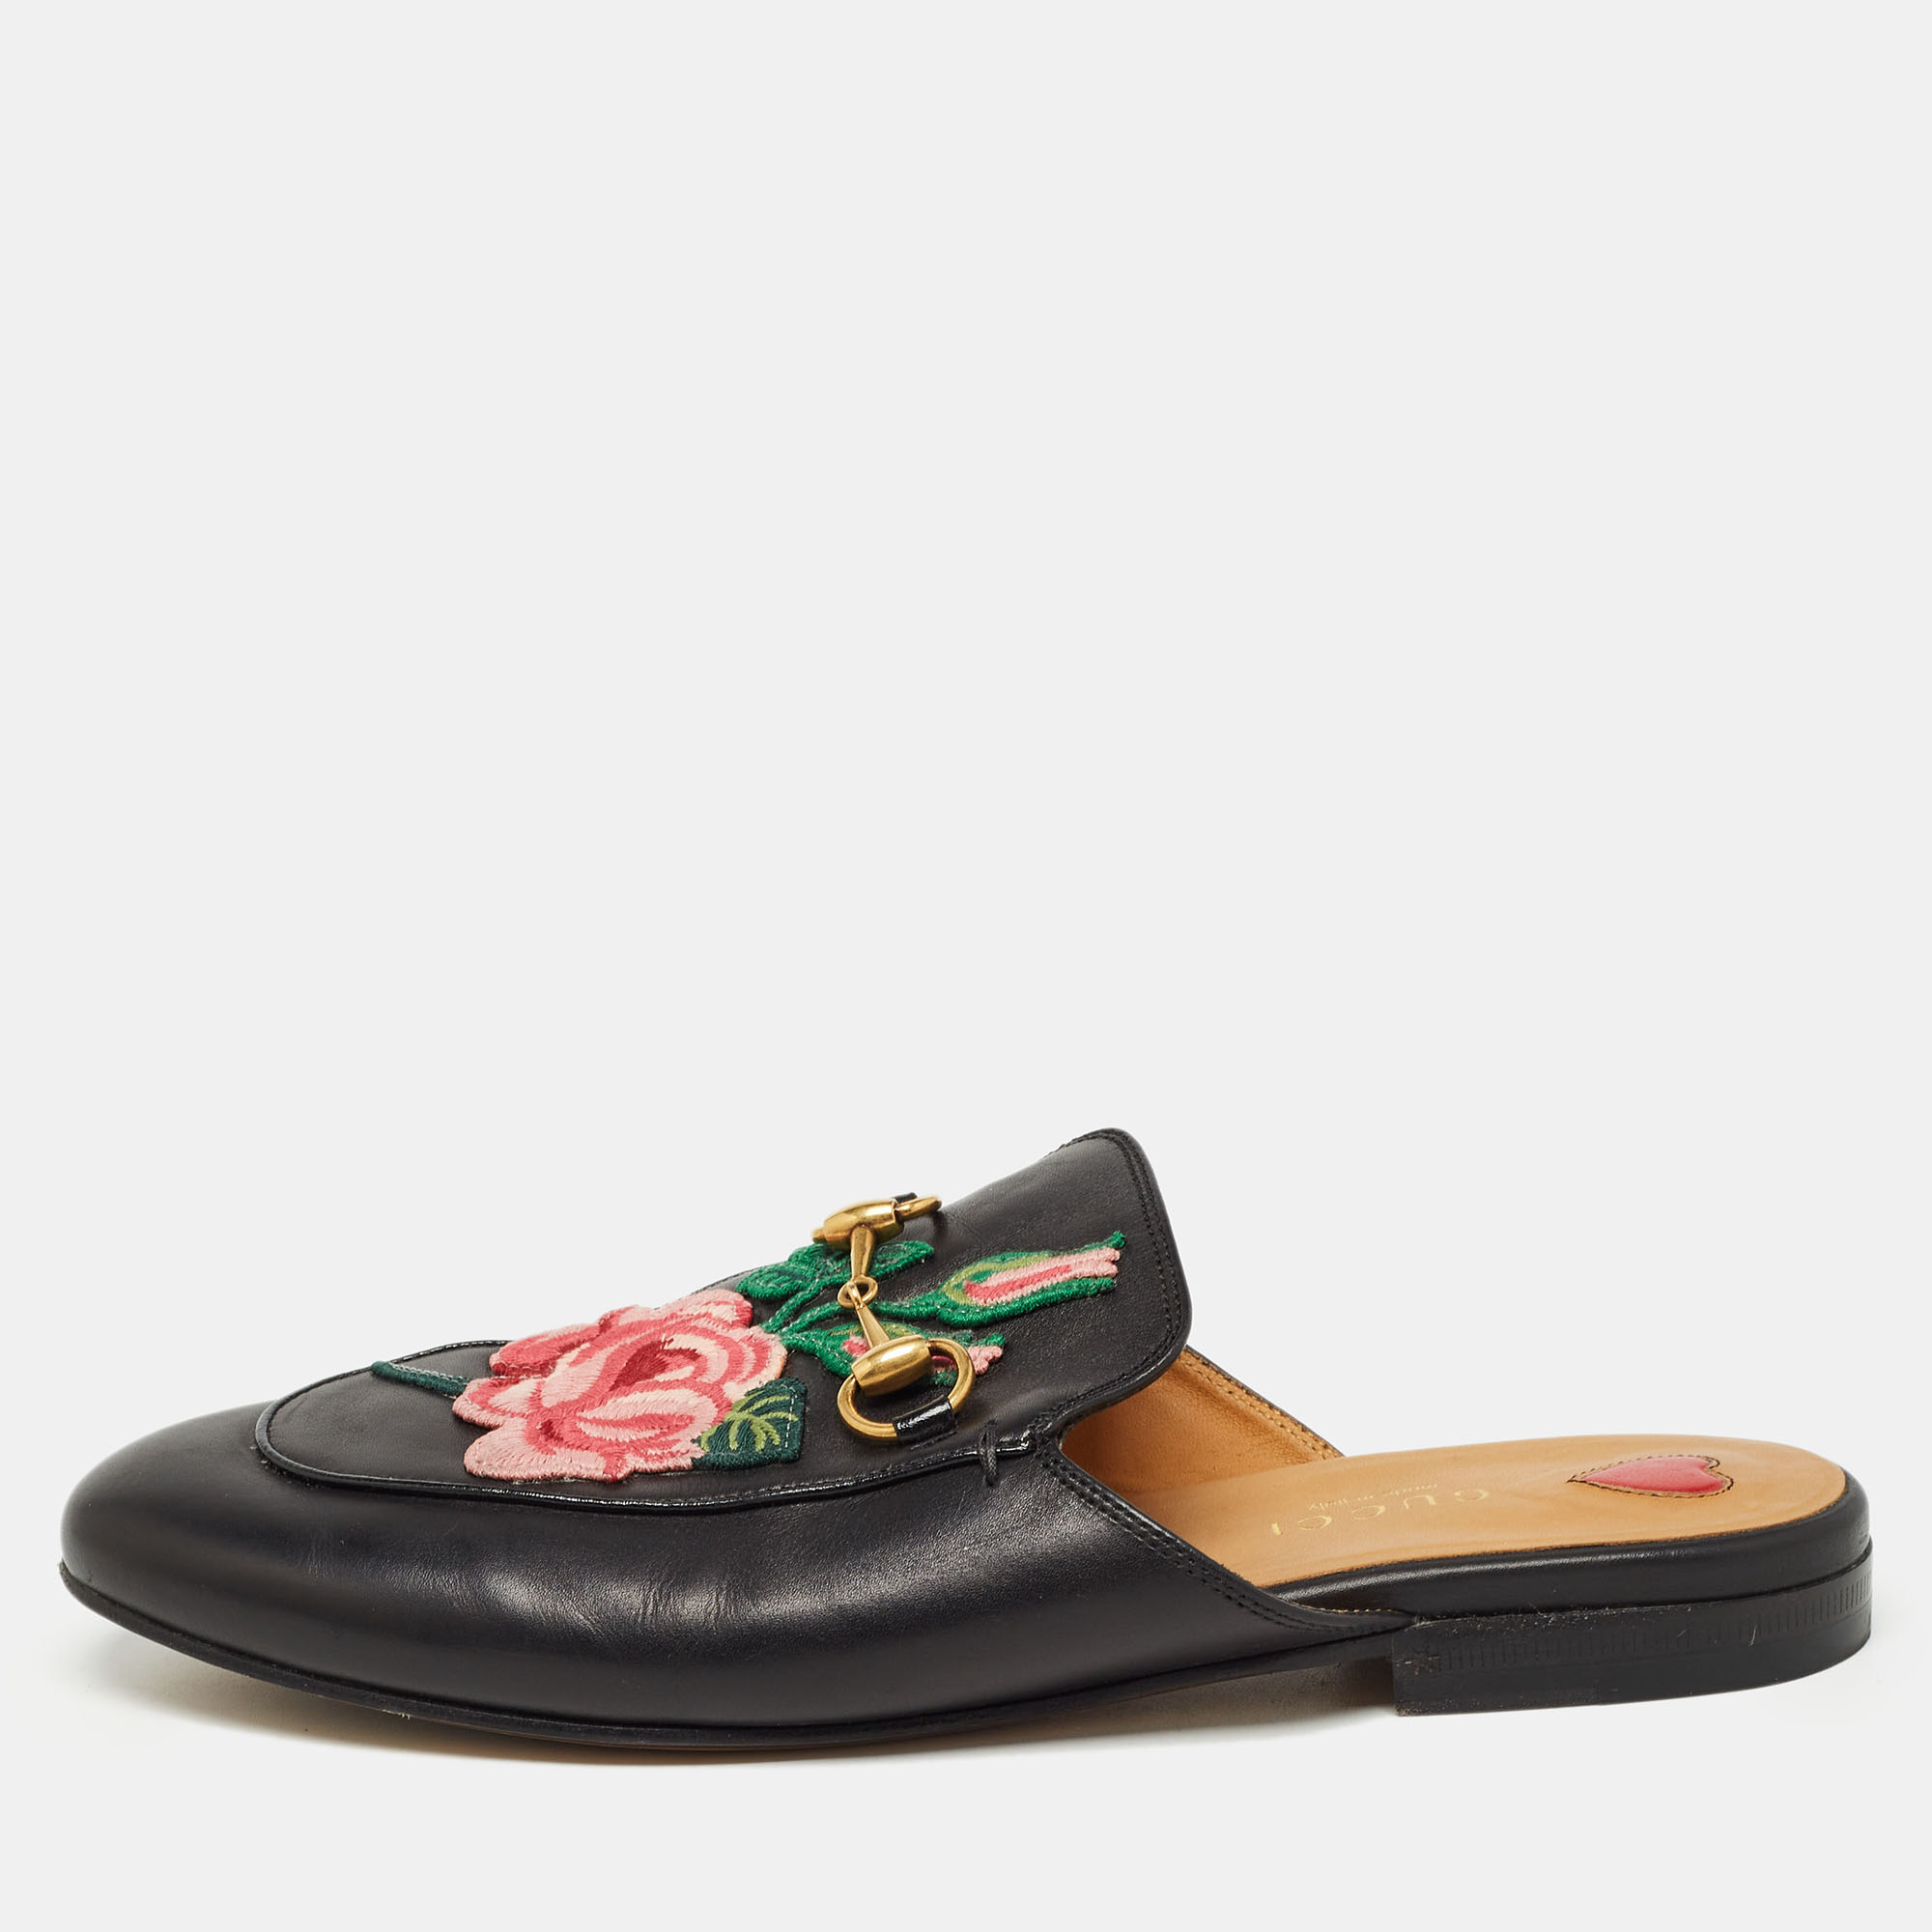 Pre-owned Gucci Black Leather Rose Embroidered Princetown Horsebit Flat Mules Size 37